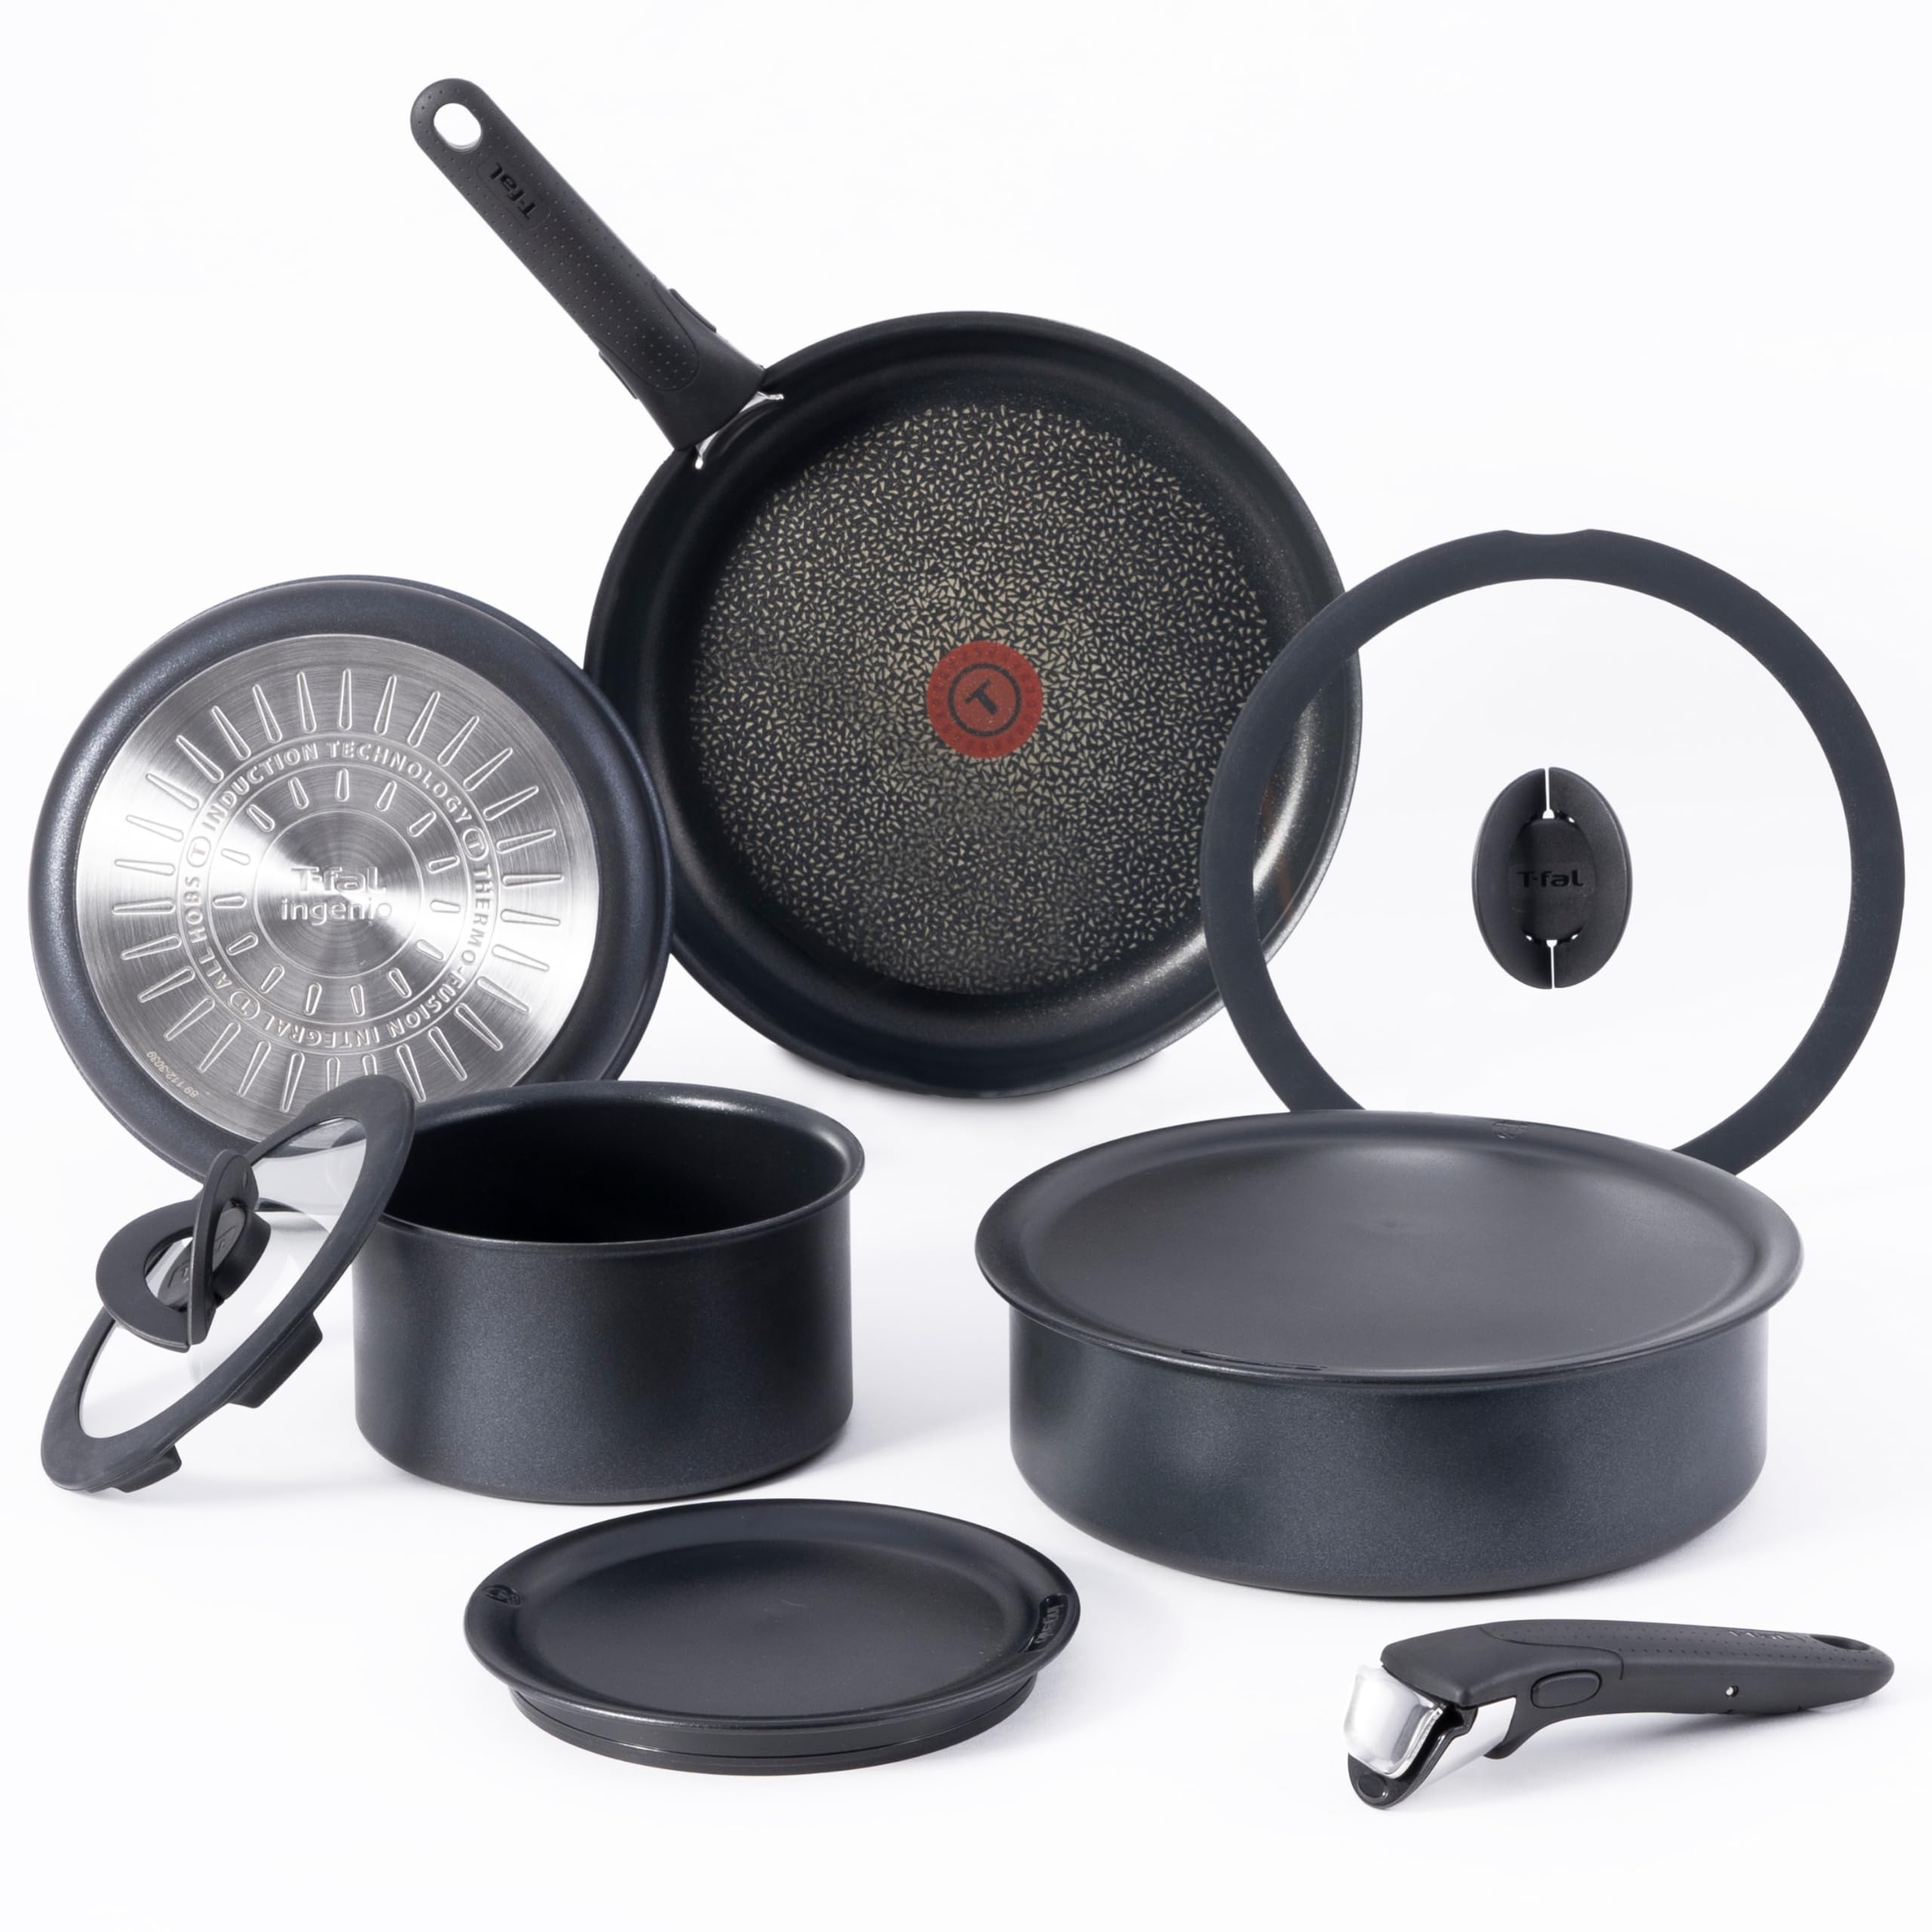 10-Piece T-fal Ingenio Nonstick Induction Cookware Set w/ Detachable Handles (Black) $80 + Free Shipping